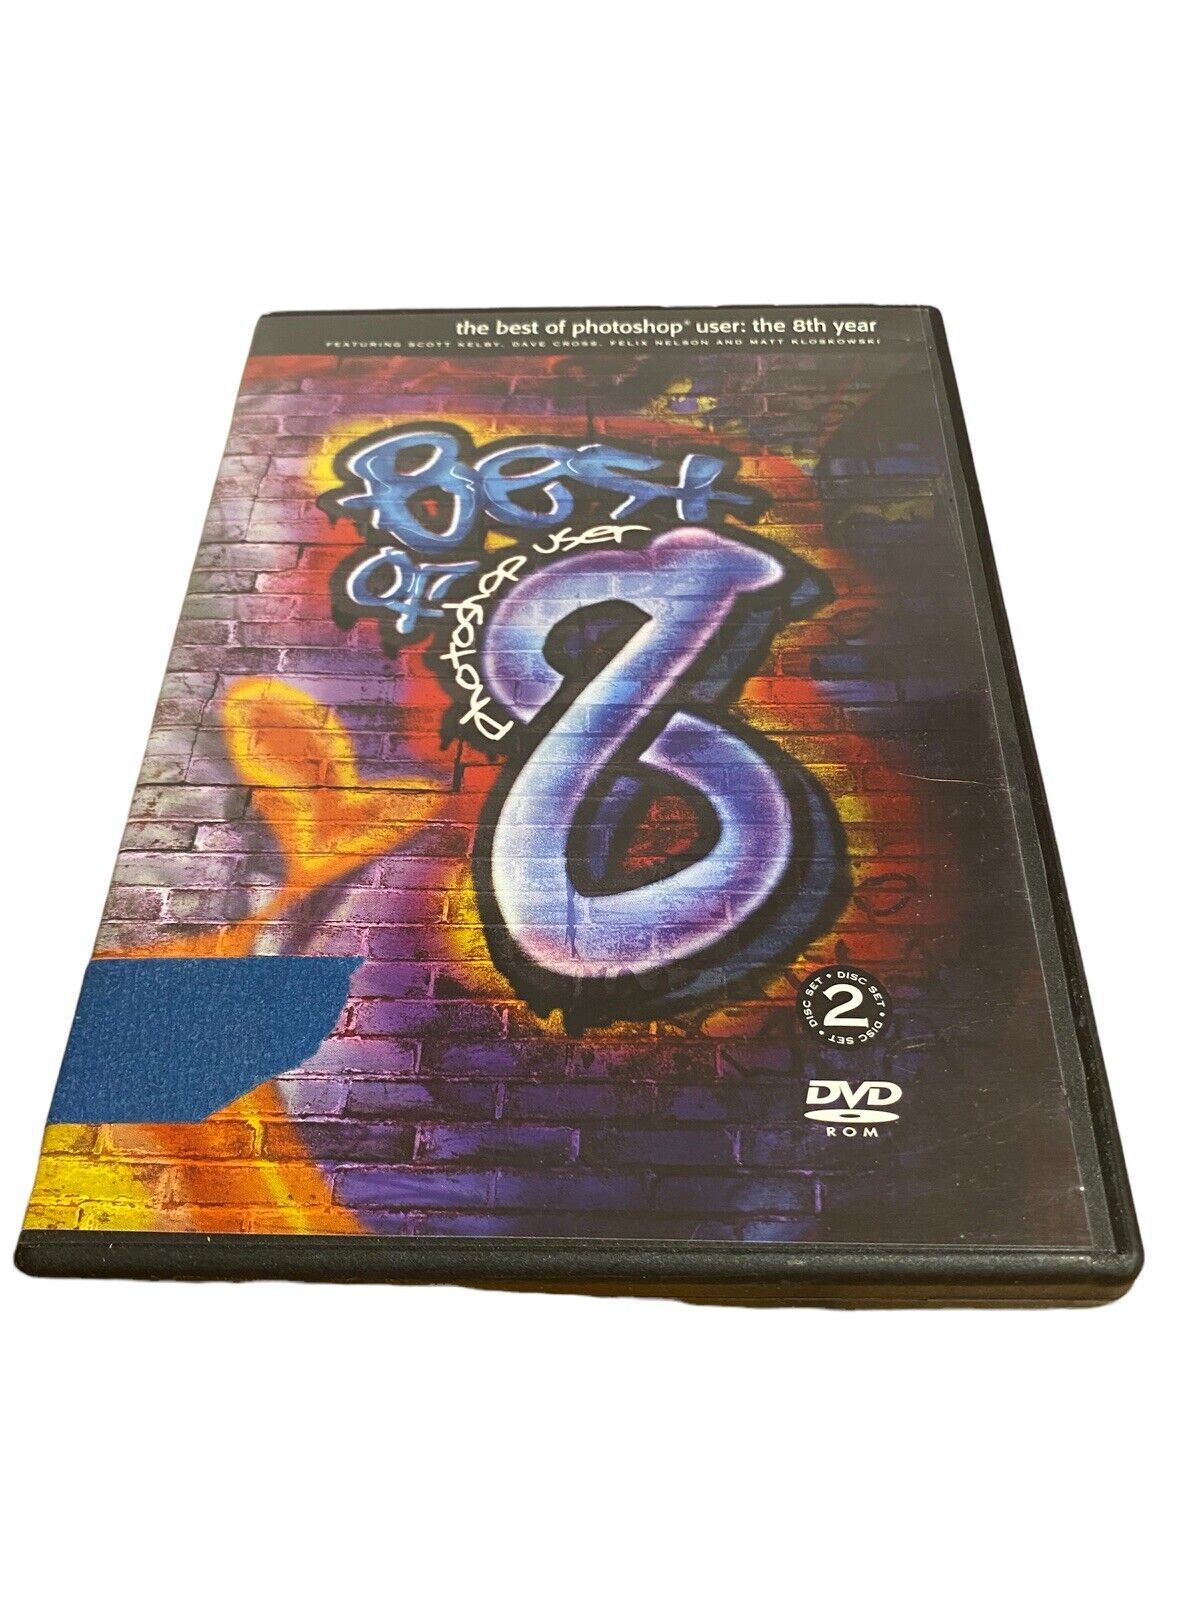 Best Photoshop User 8th Year 2 Disc Set DVD Rom Computer